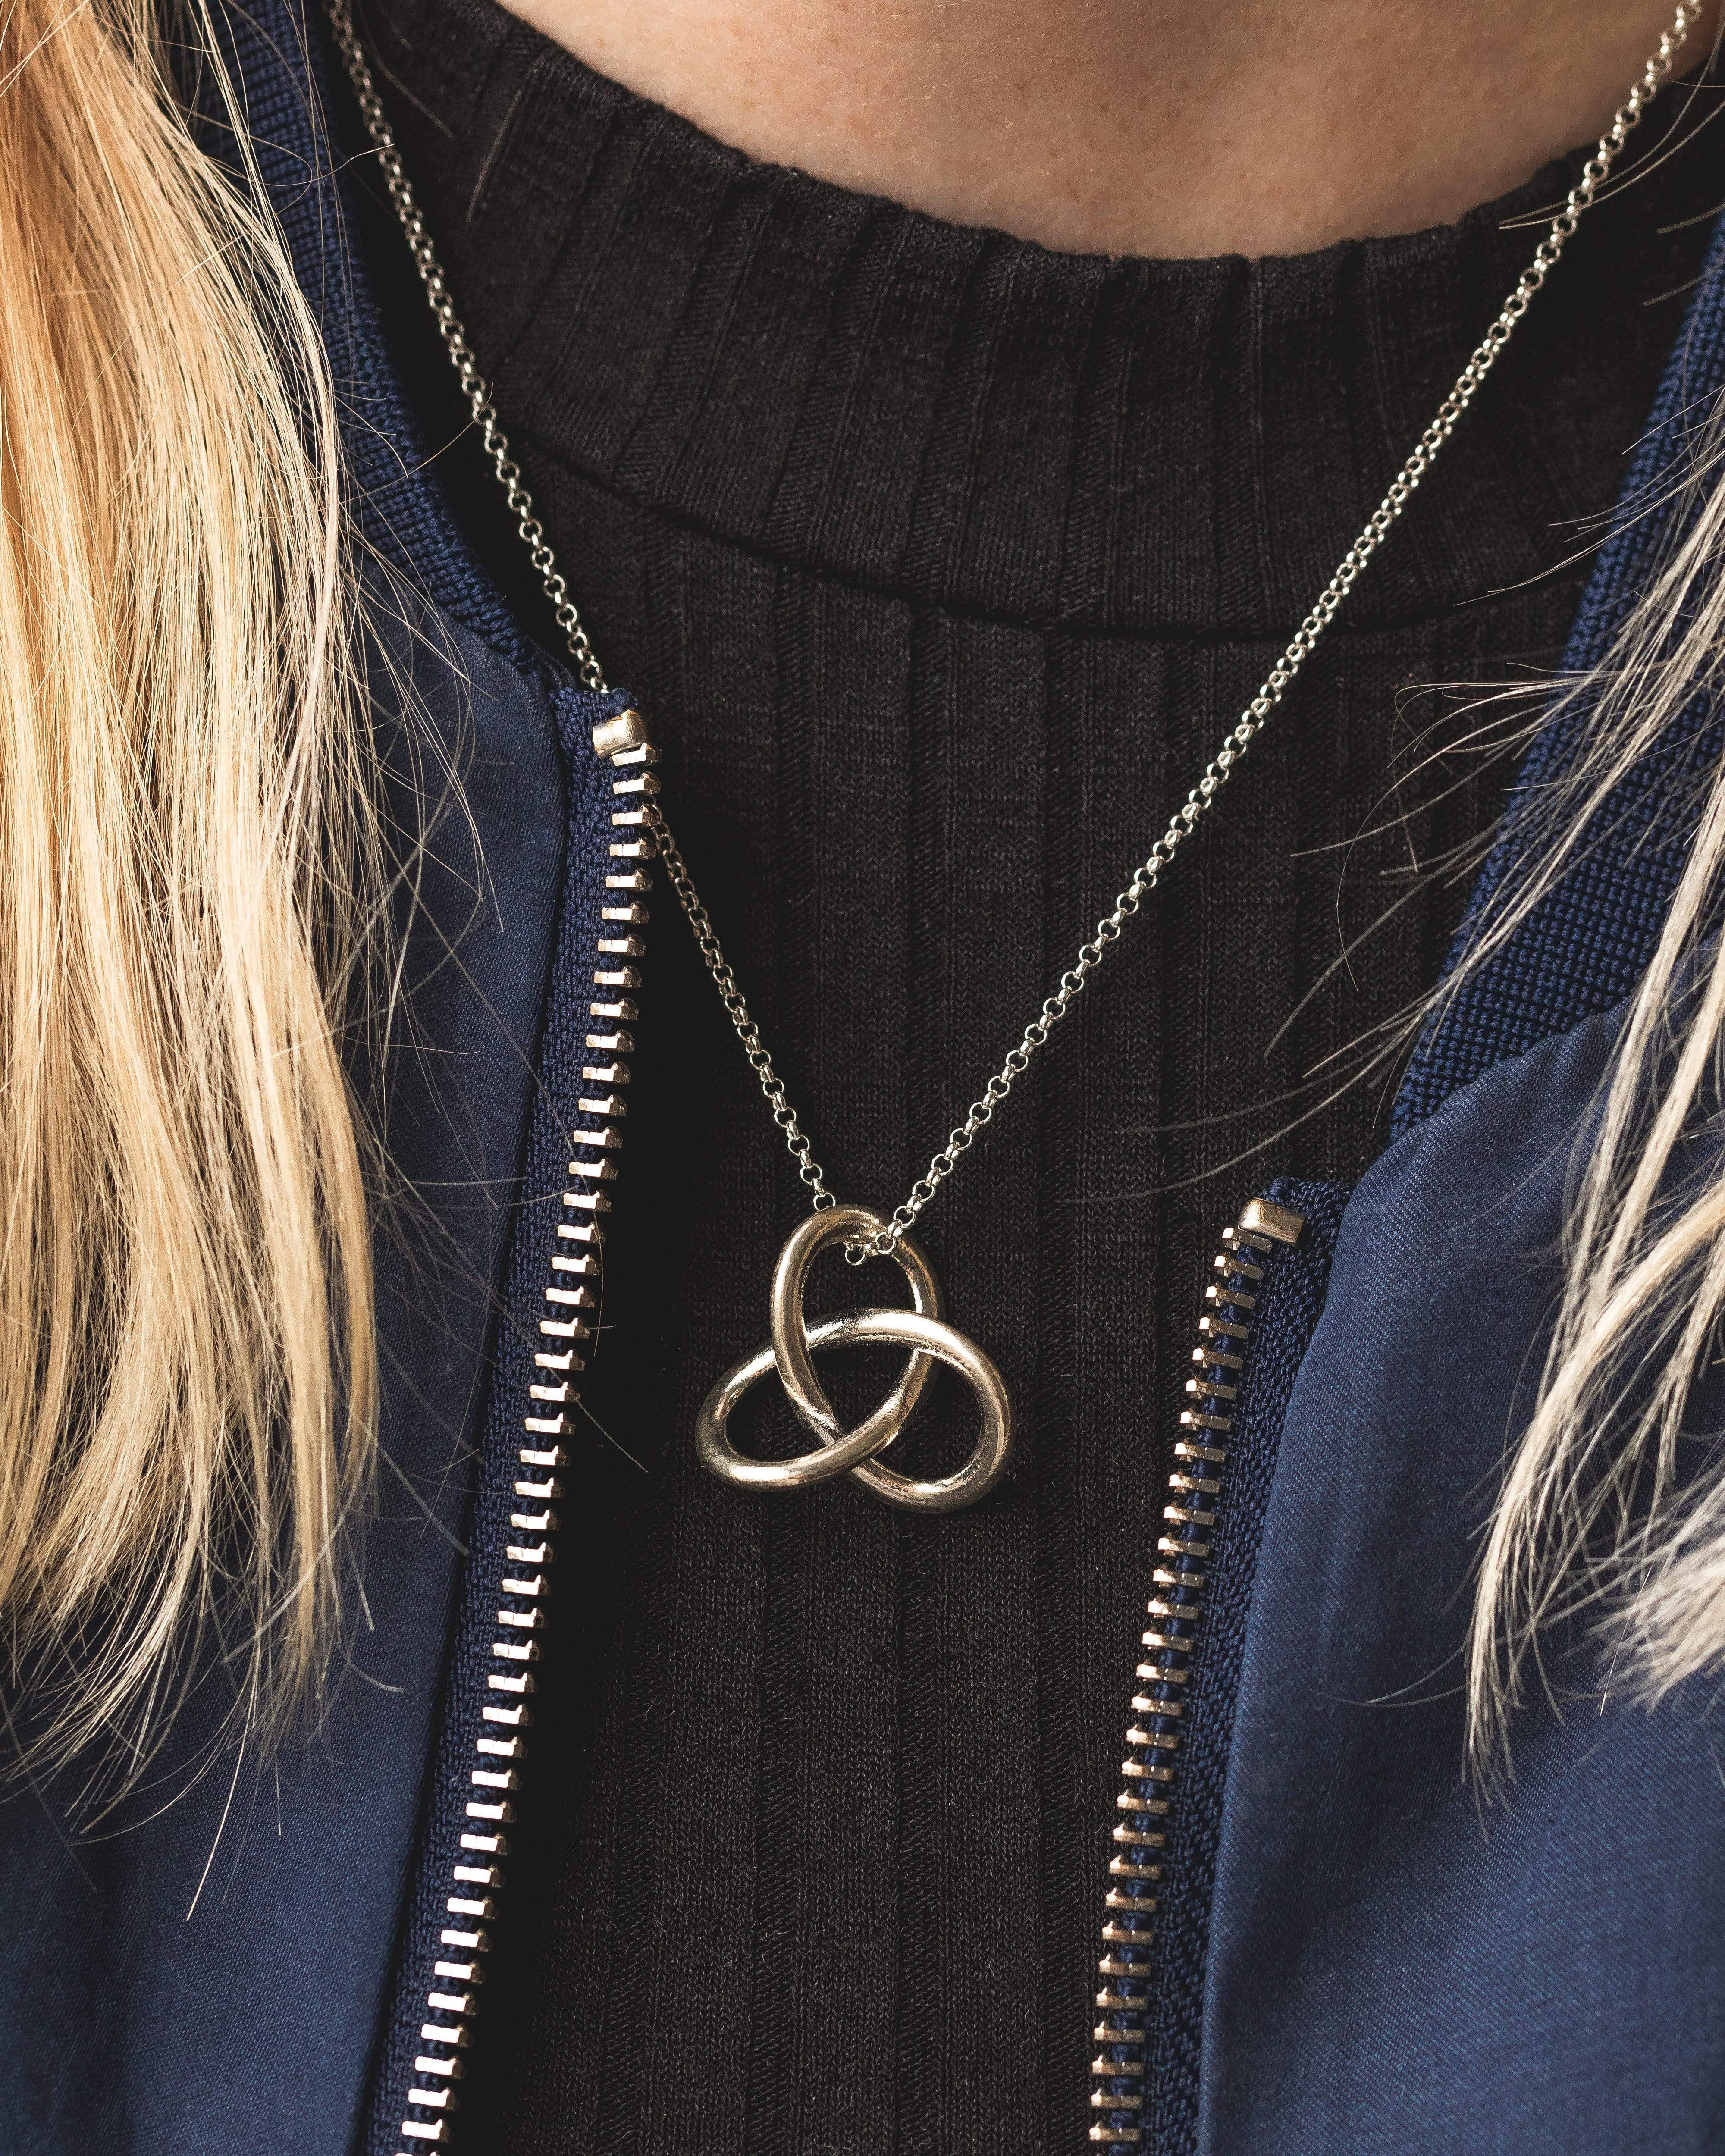 Celtic Love Knot Necklace in Sterling Silver on a 18